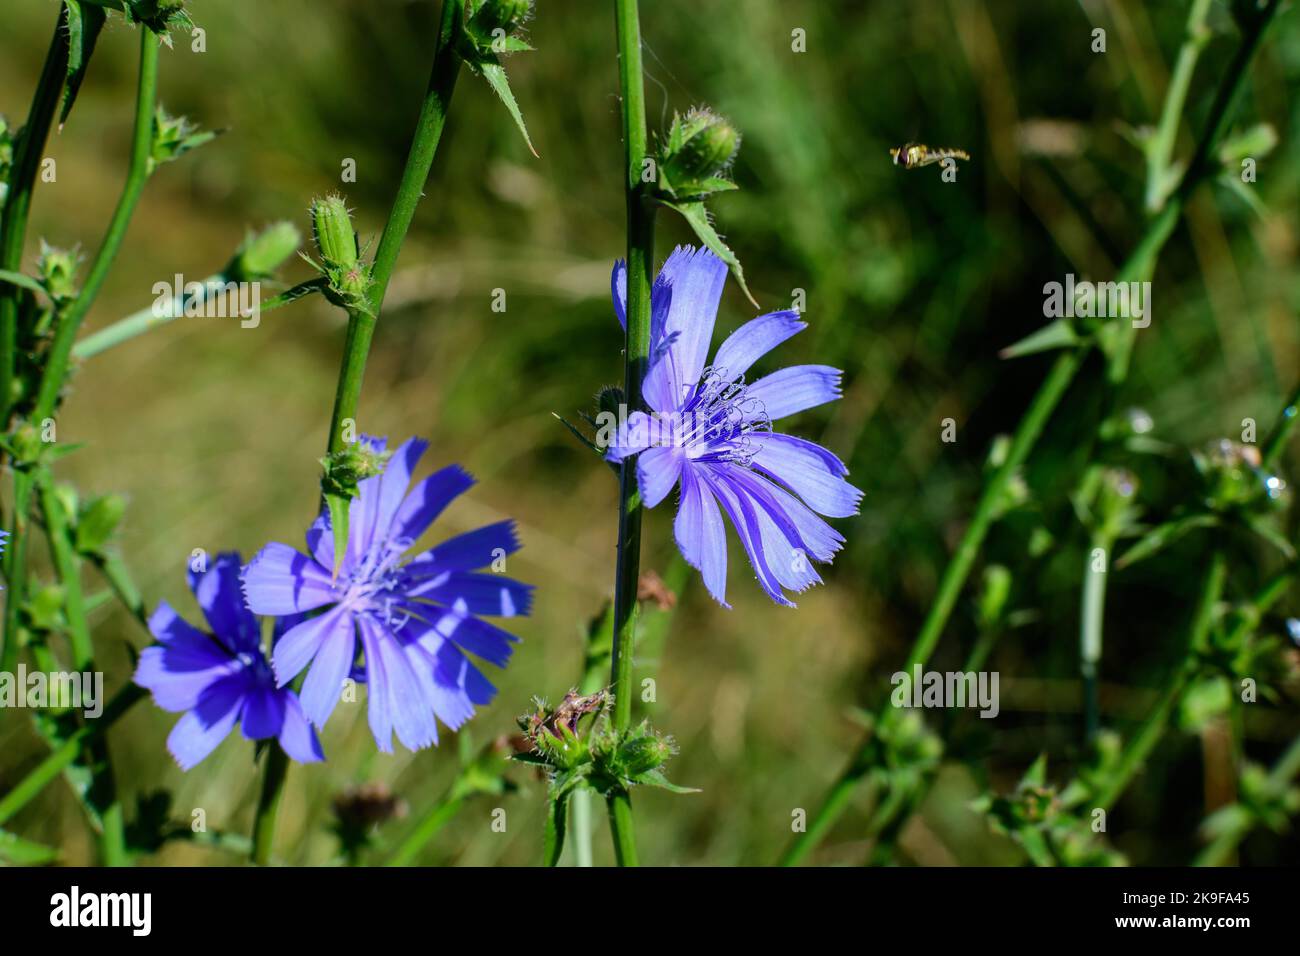 Vivid blue flower of wild common chicory plant, in a meadow in a sunny summer day Stock Photo